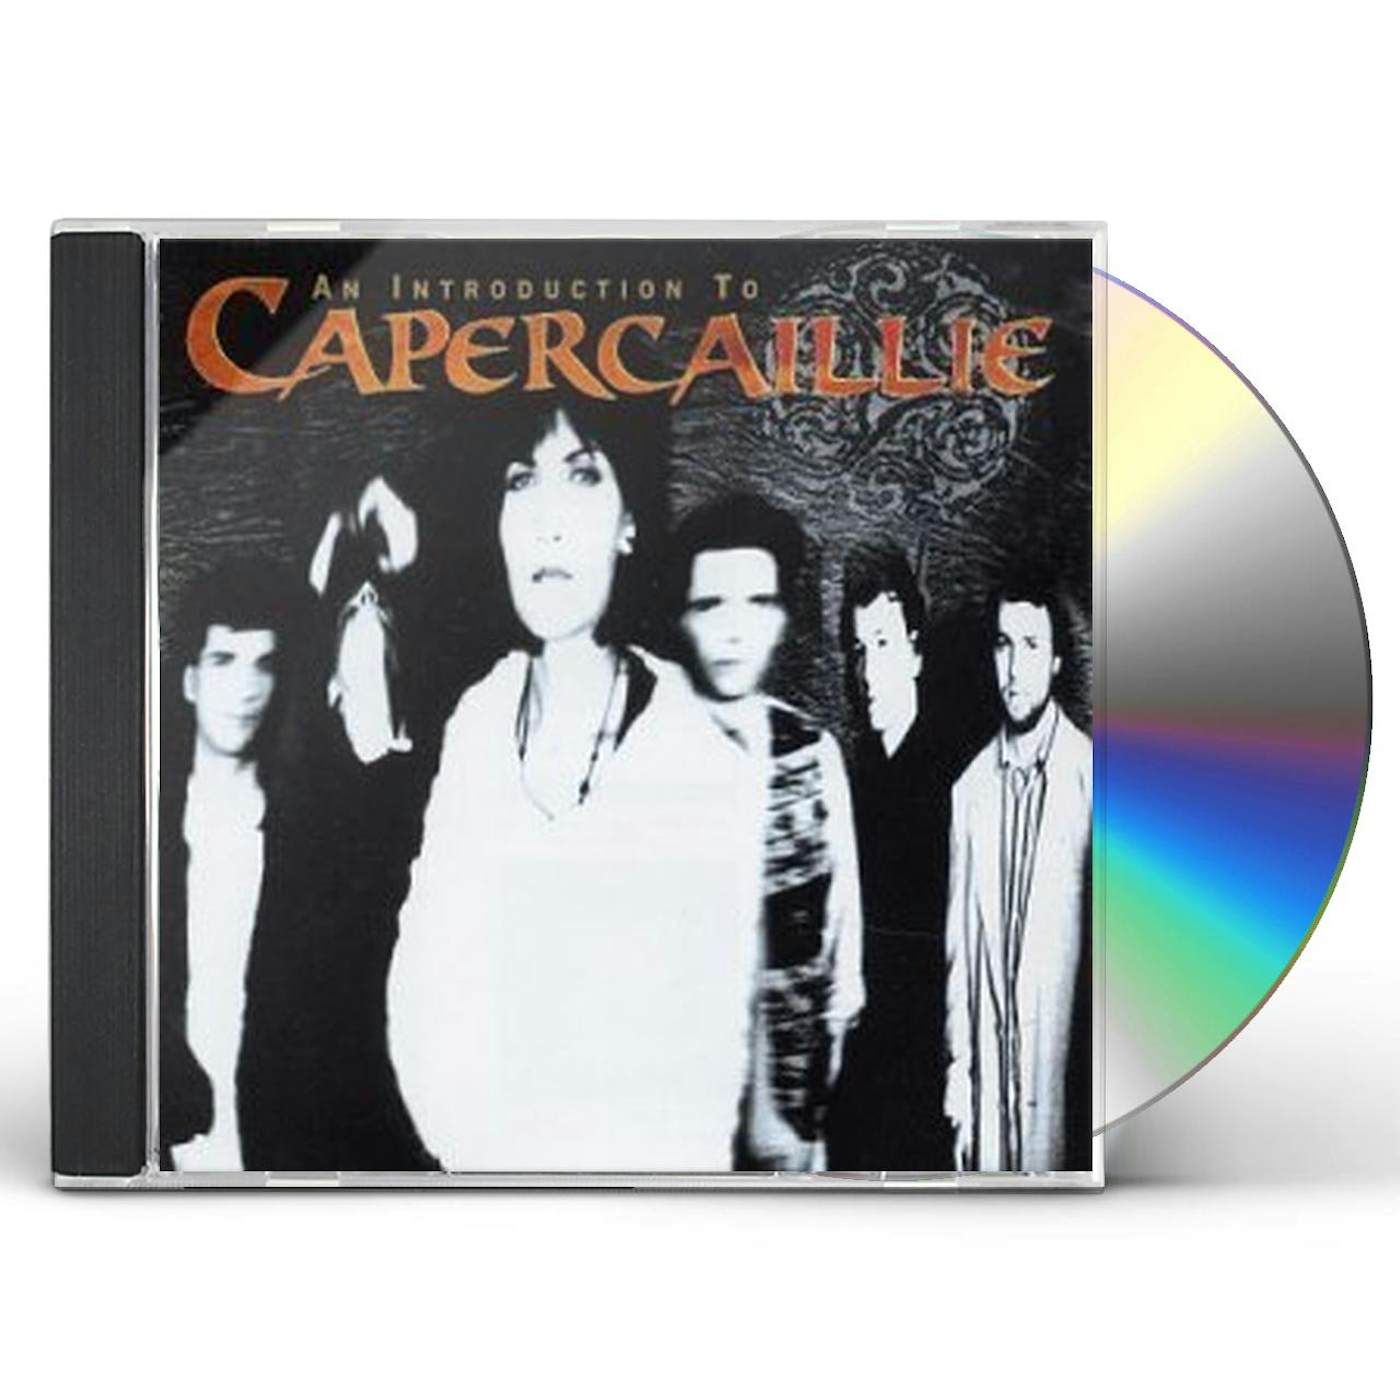 INTRODUCTION TO CAPERCAILLIE CD